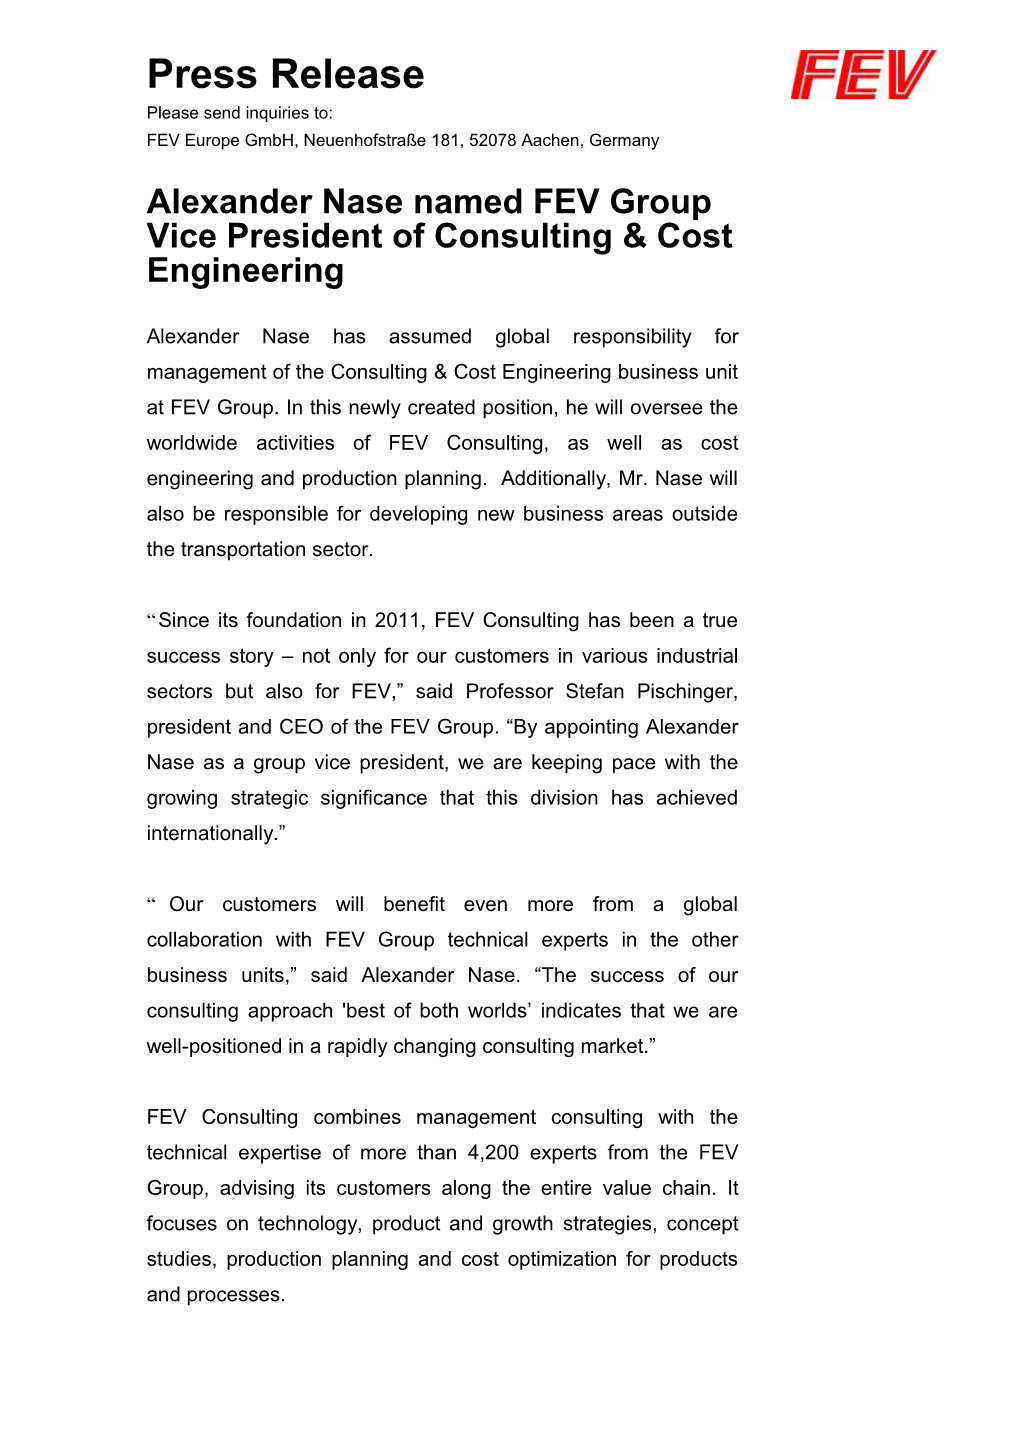 Alexander Nase Named FEV Group Vice President of Consulting & Cost Engineering s1